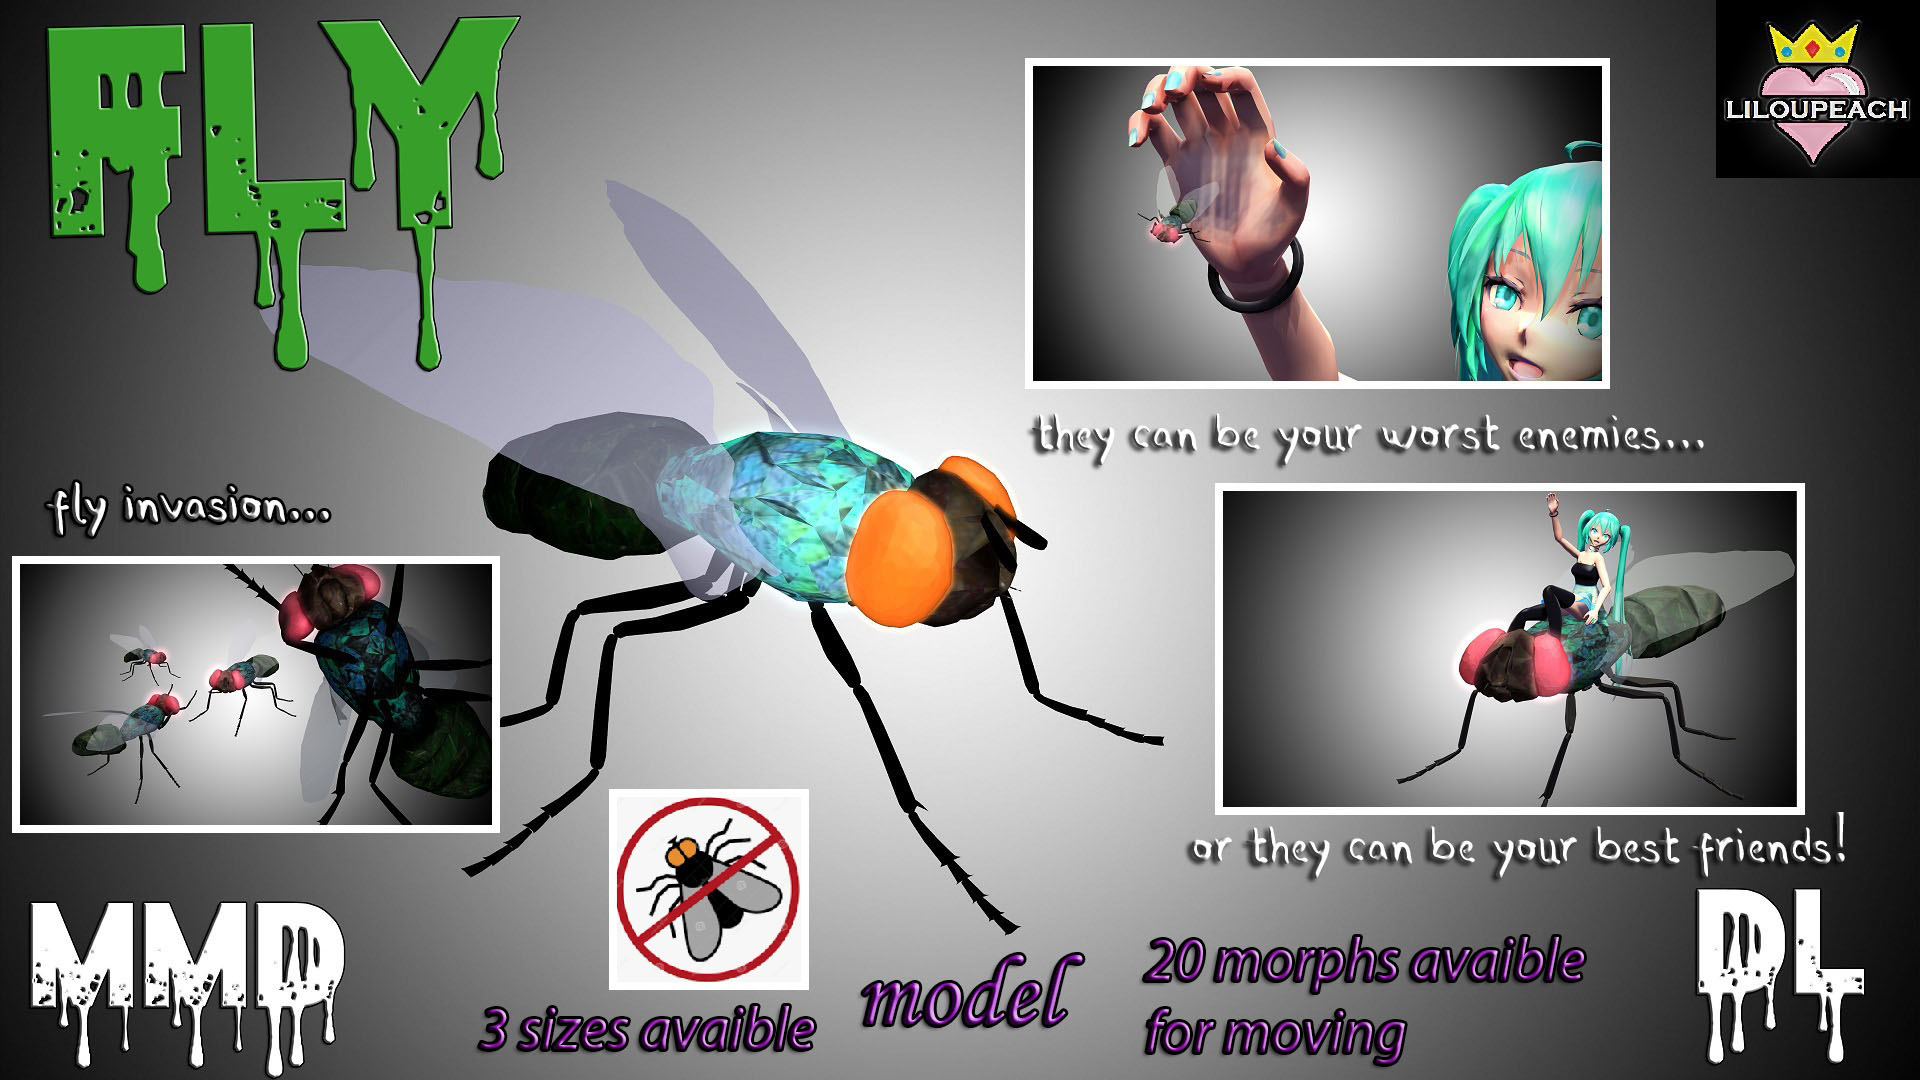 Fly insect MMD DL model by liloupeach on DeviantArt